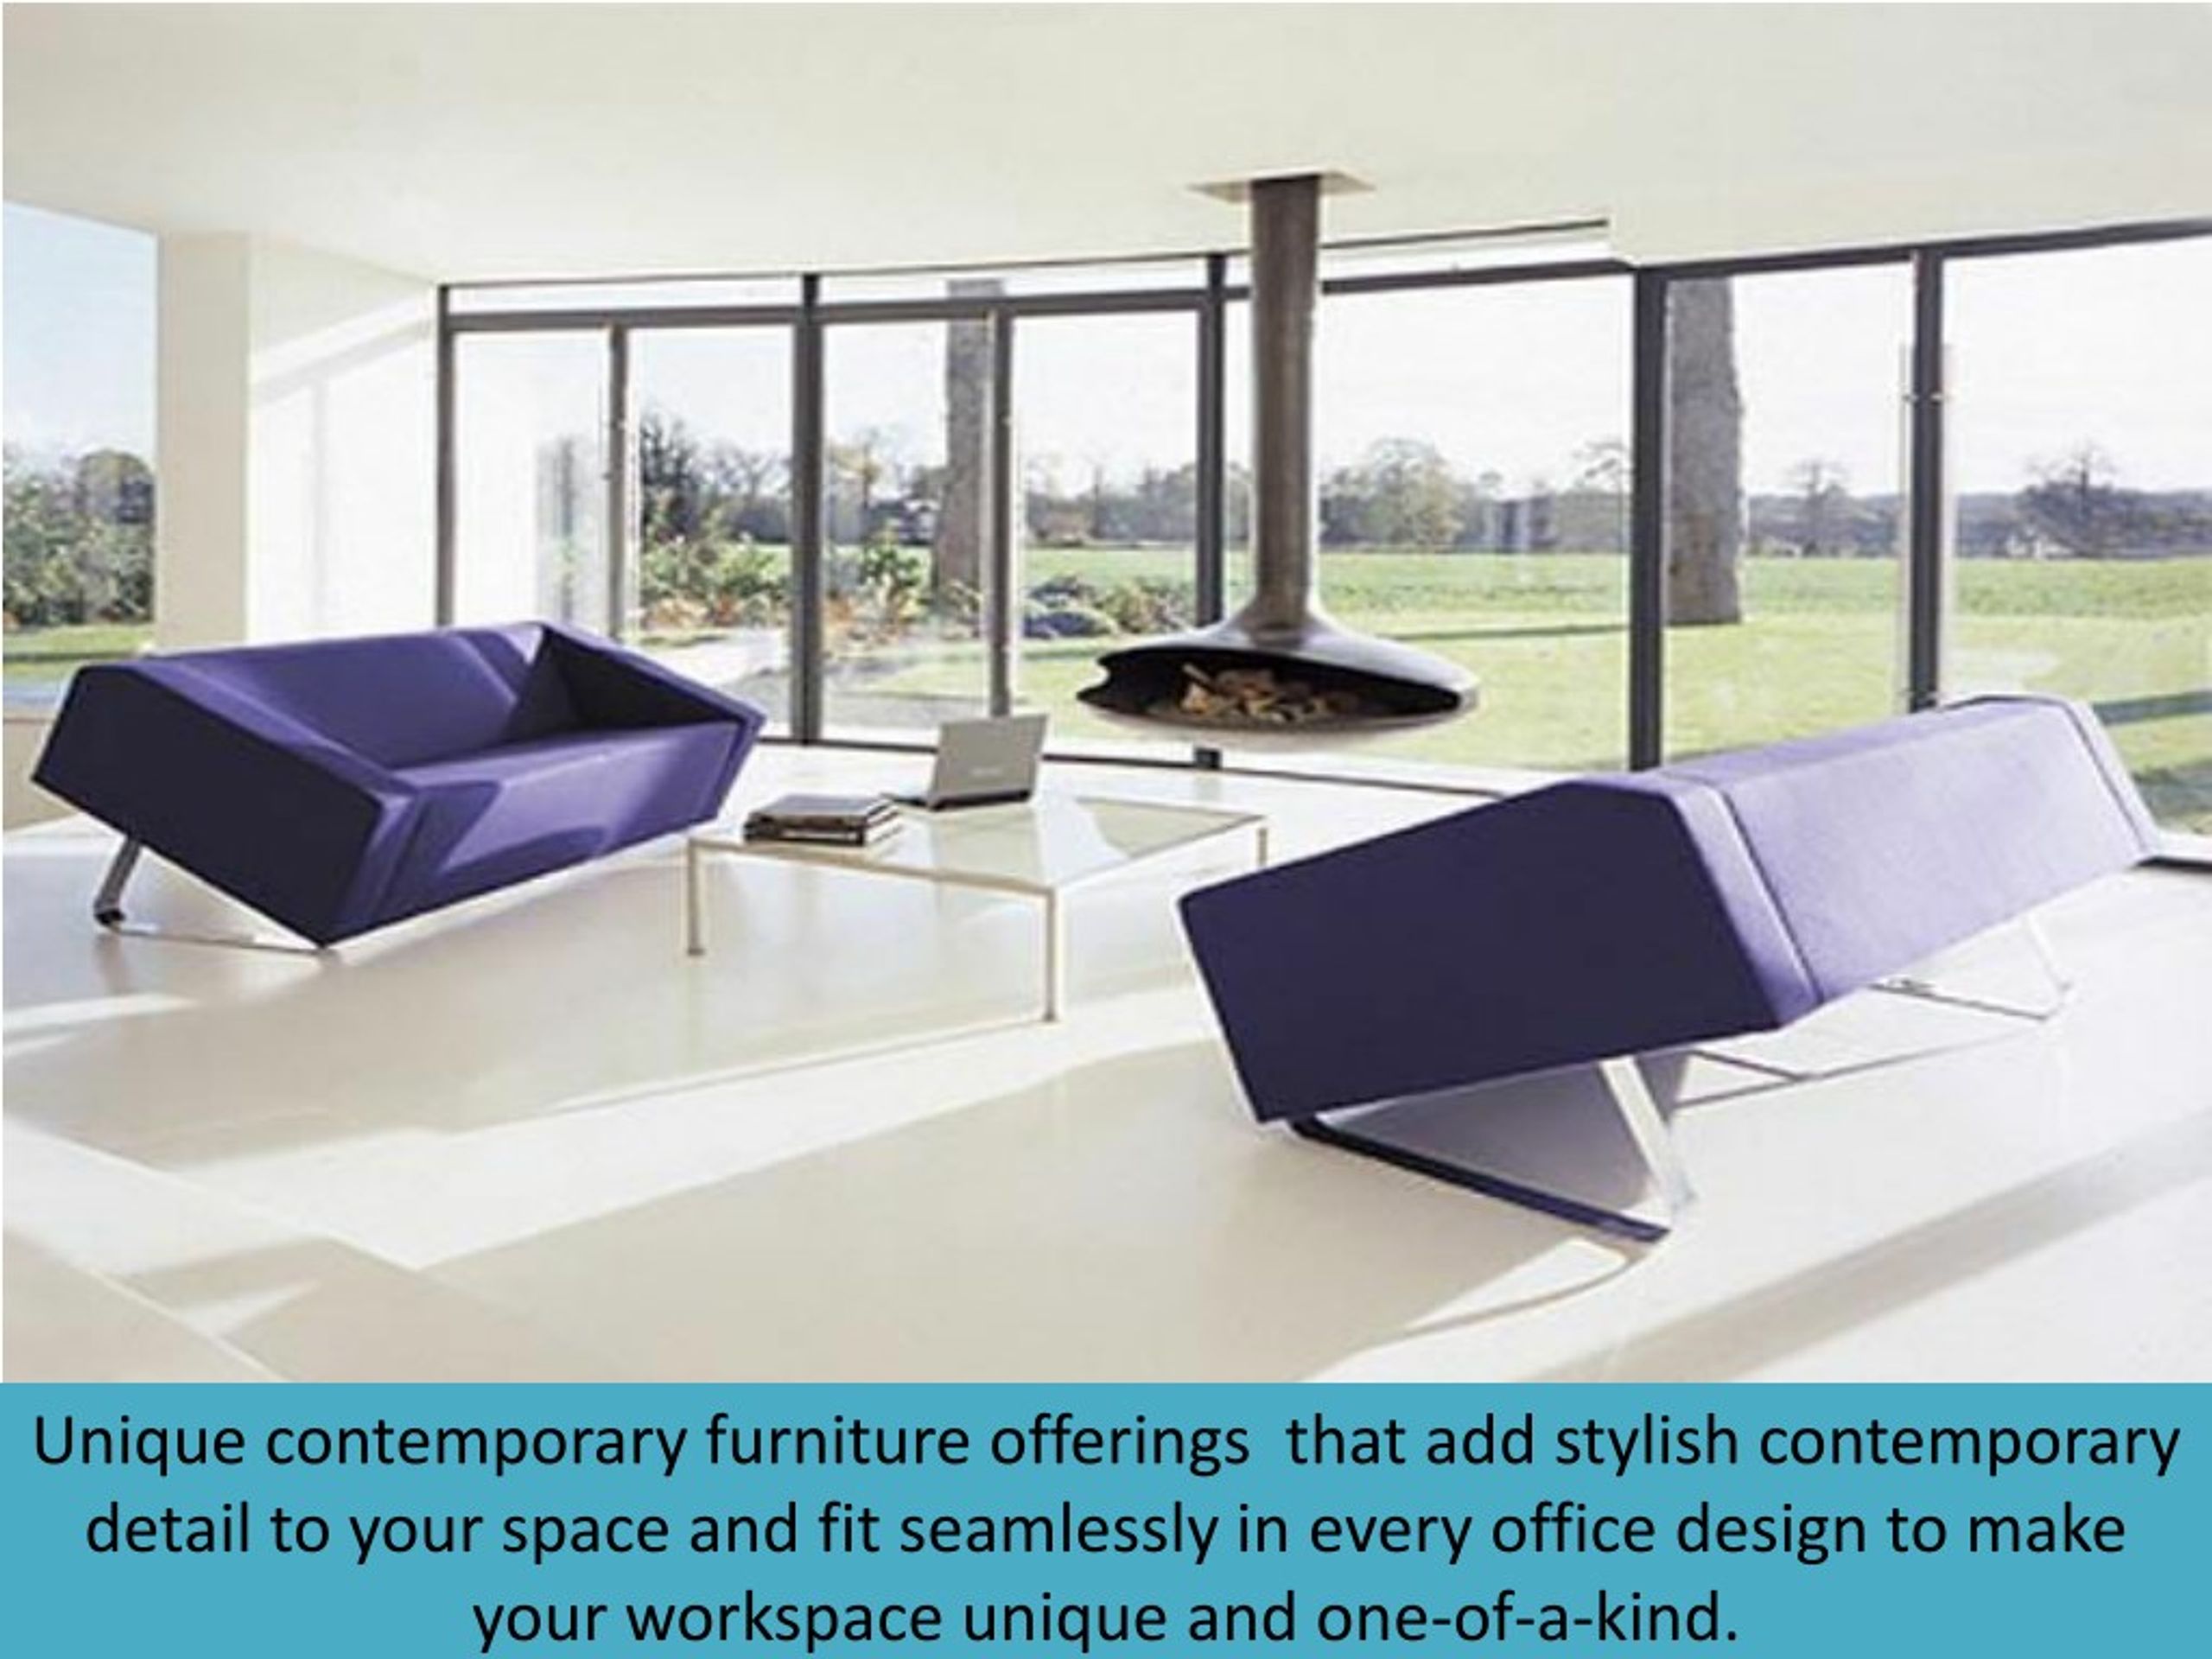 Ppt Details Of Unique Contemporary Office Furniture Powerpoint